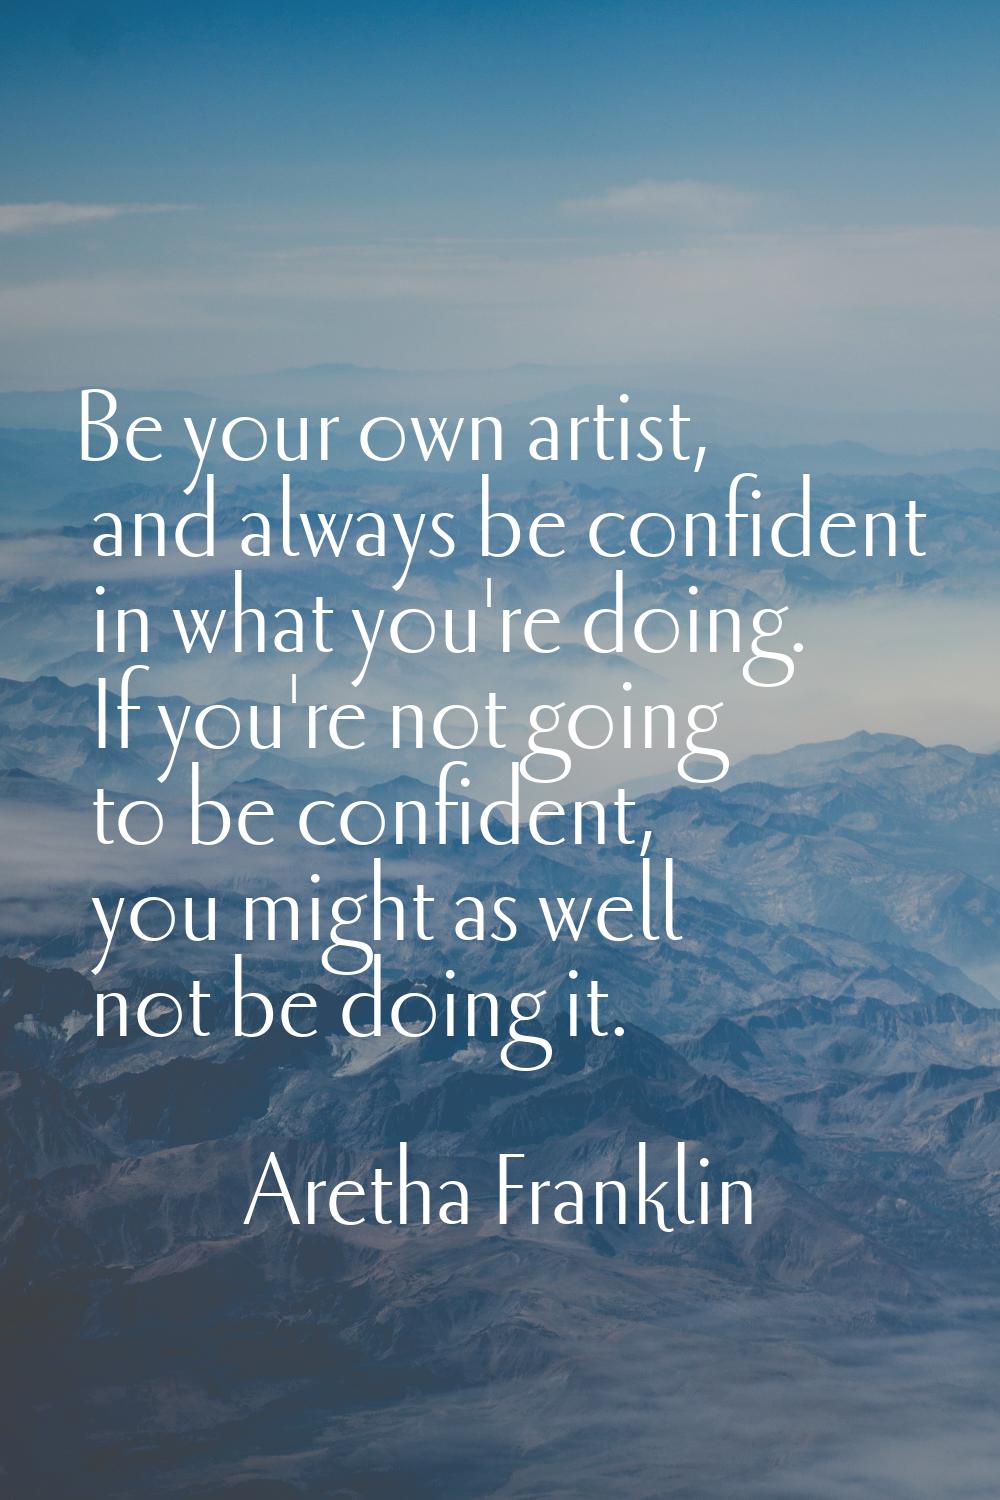 Be your own artist, and always be confident in what you're doing. If you're not going to be confide